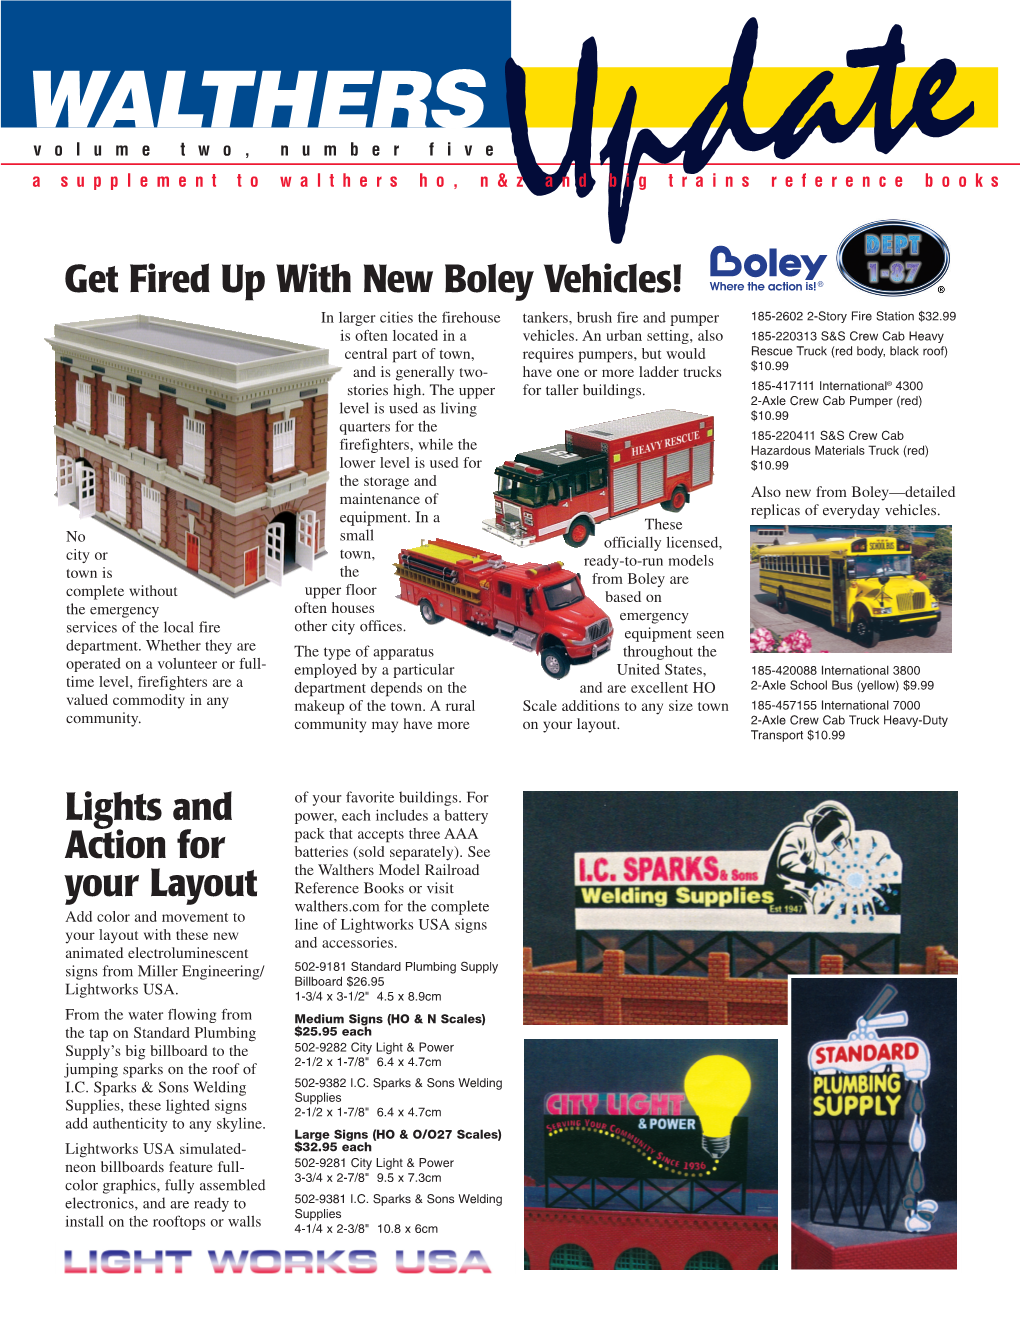 Lights and Action for Your Layout Get Fired up with New Boley Vehicles!